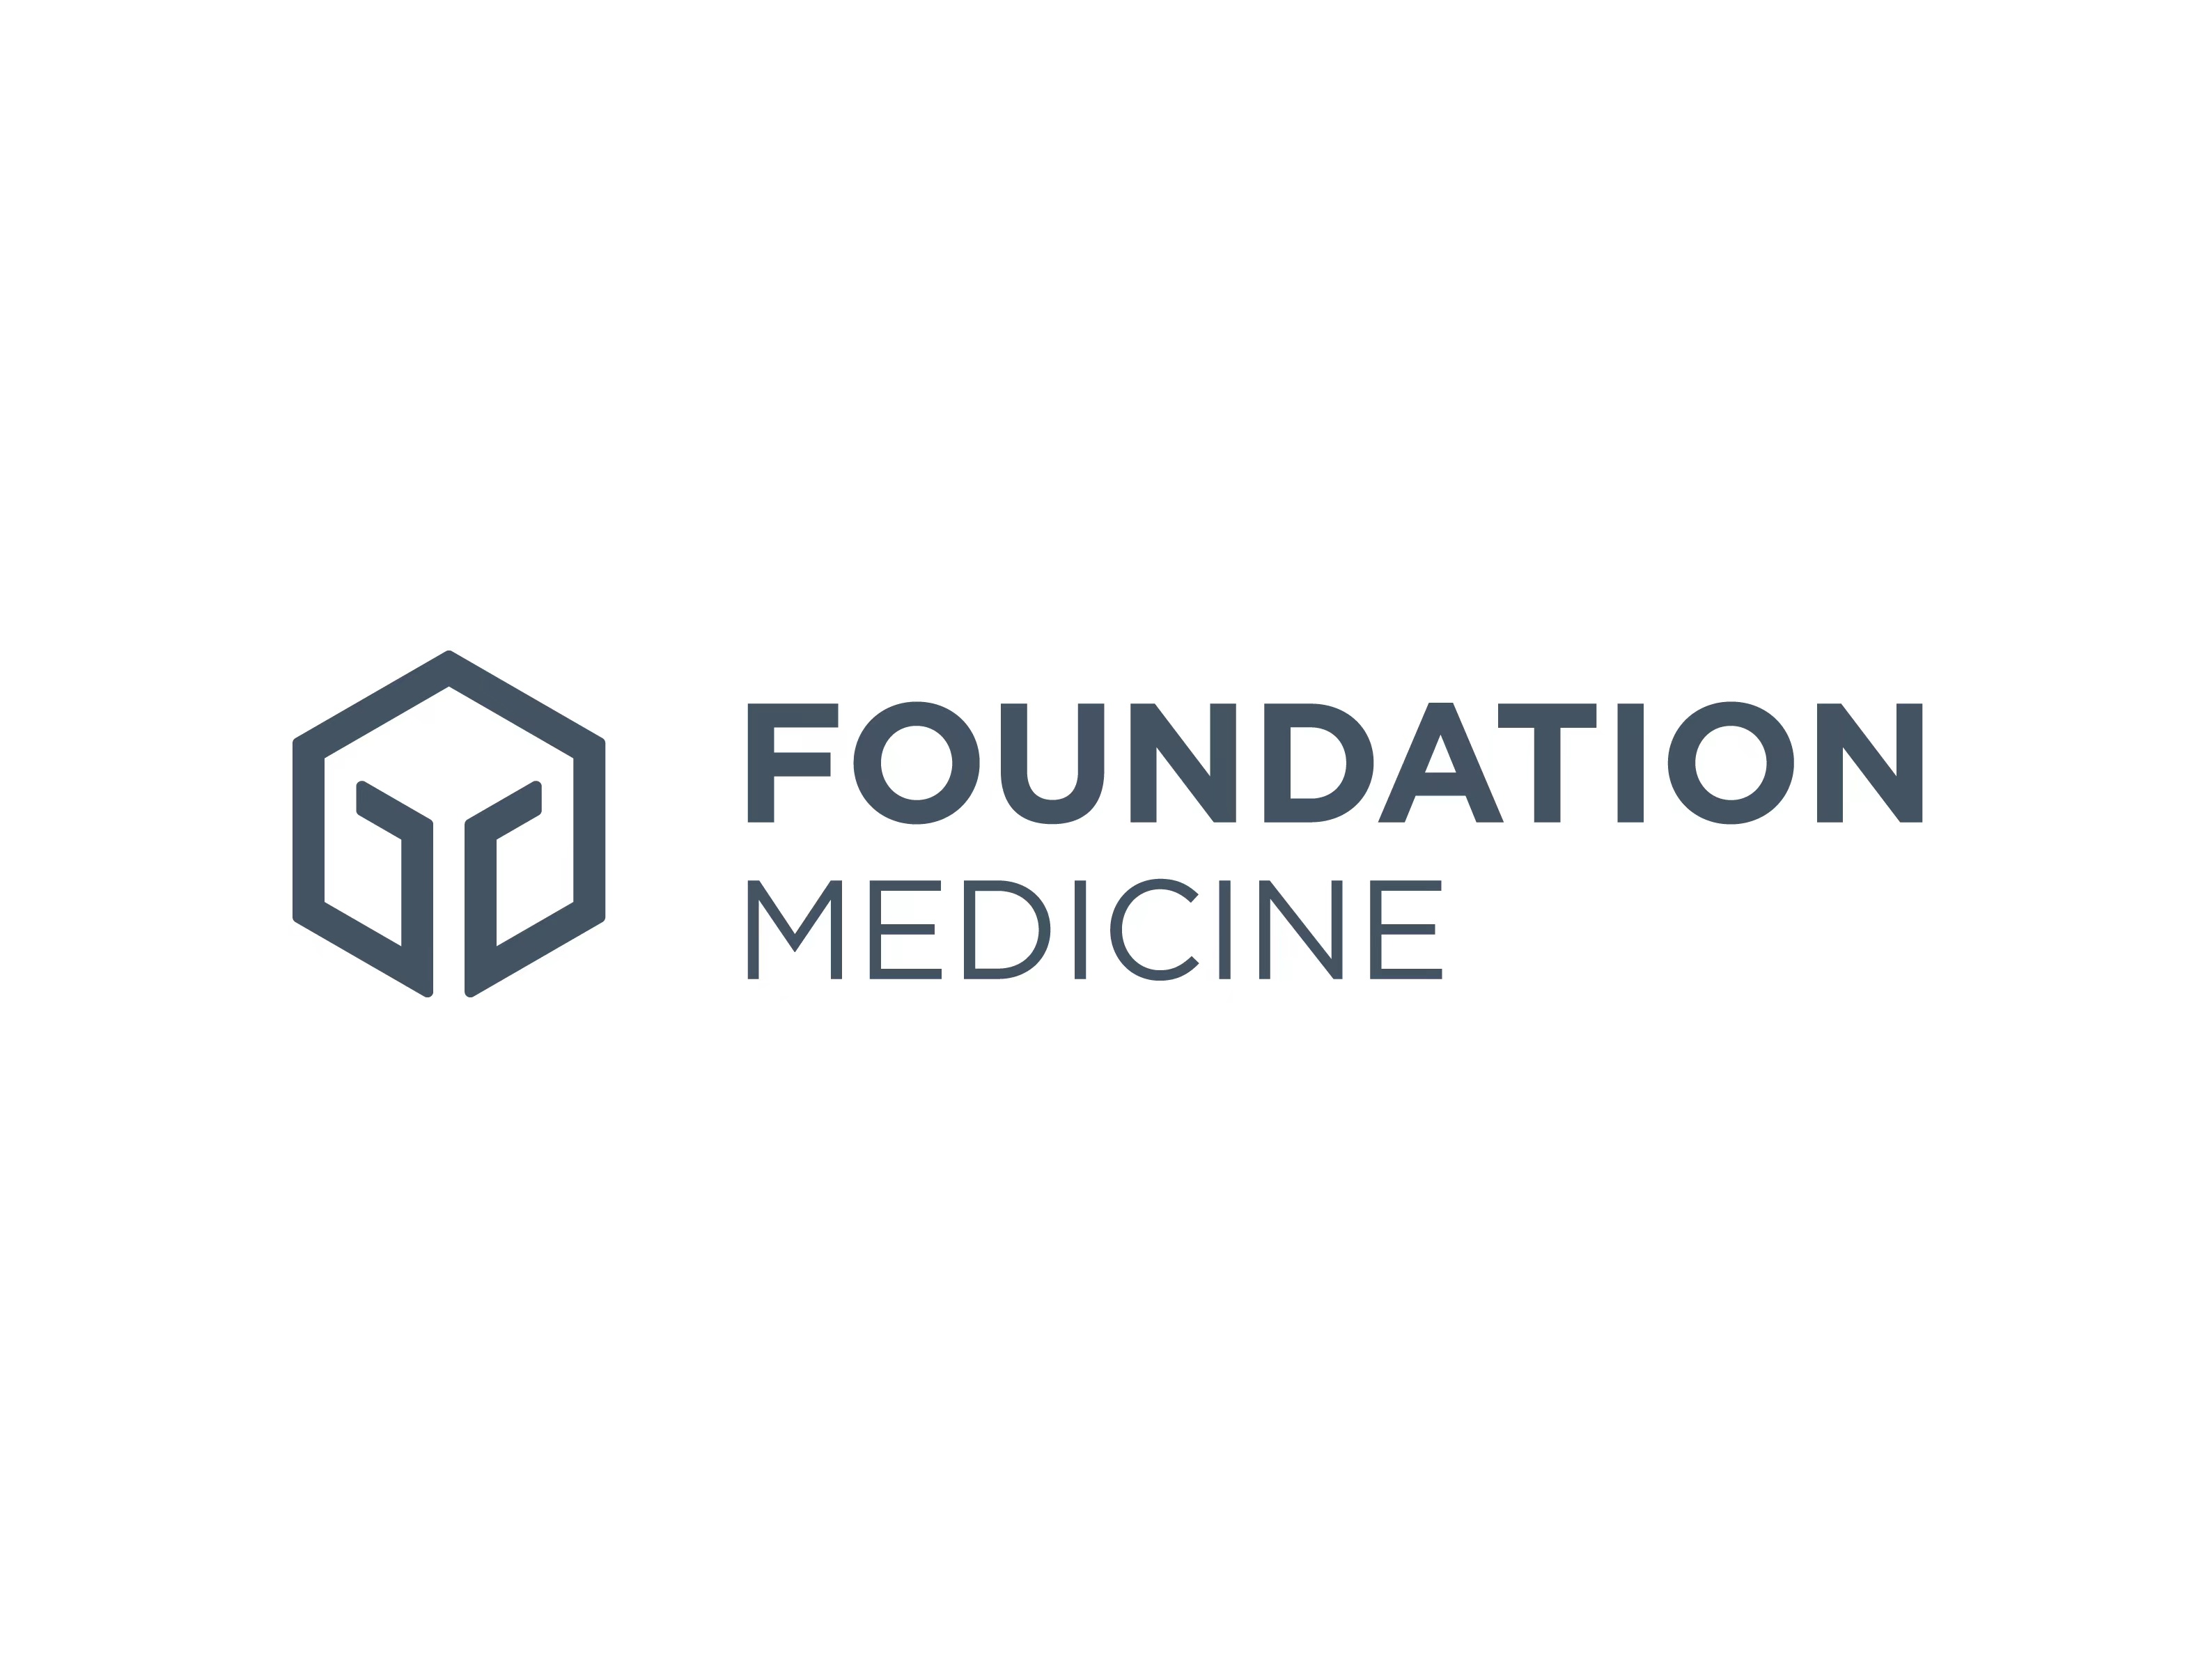 FDA Approves Foundation Medicine Assay as CDx for Certain NSCLC Therapies